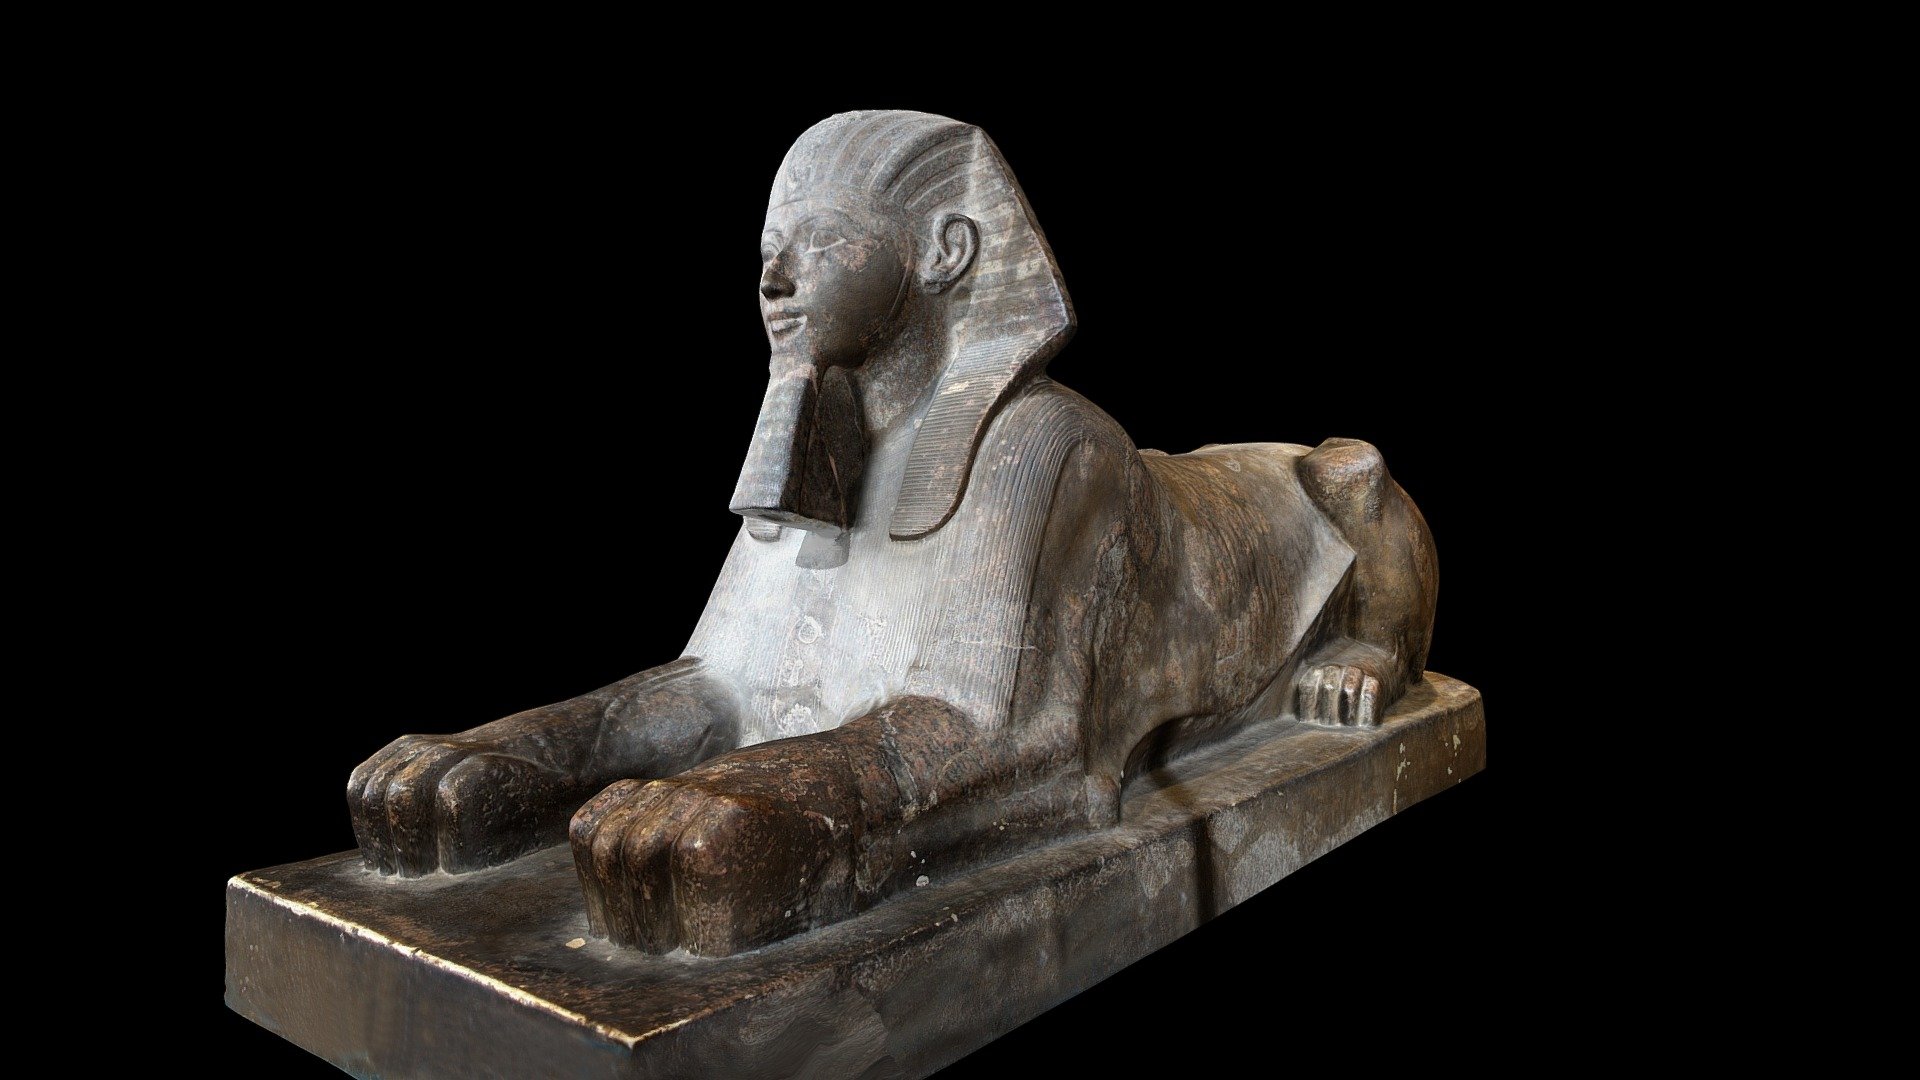 Red granite sphinx of Hatshepsut from Deir el-Bahari.  Located in the Cairo Museum Ground Floor Gallery 6

Created from 149 photographs (18MP Cannon EOS Rebel T5i) using Agisoft Photoscan 1.4.3.  November 17, 2018 3d model